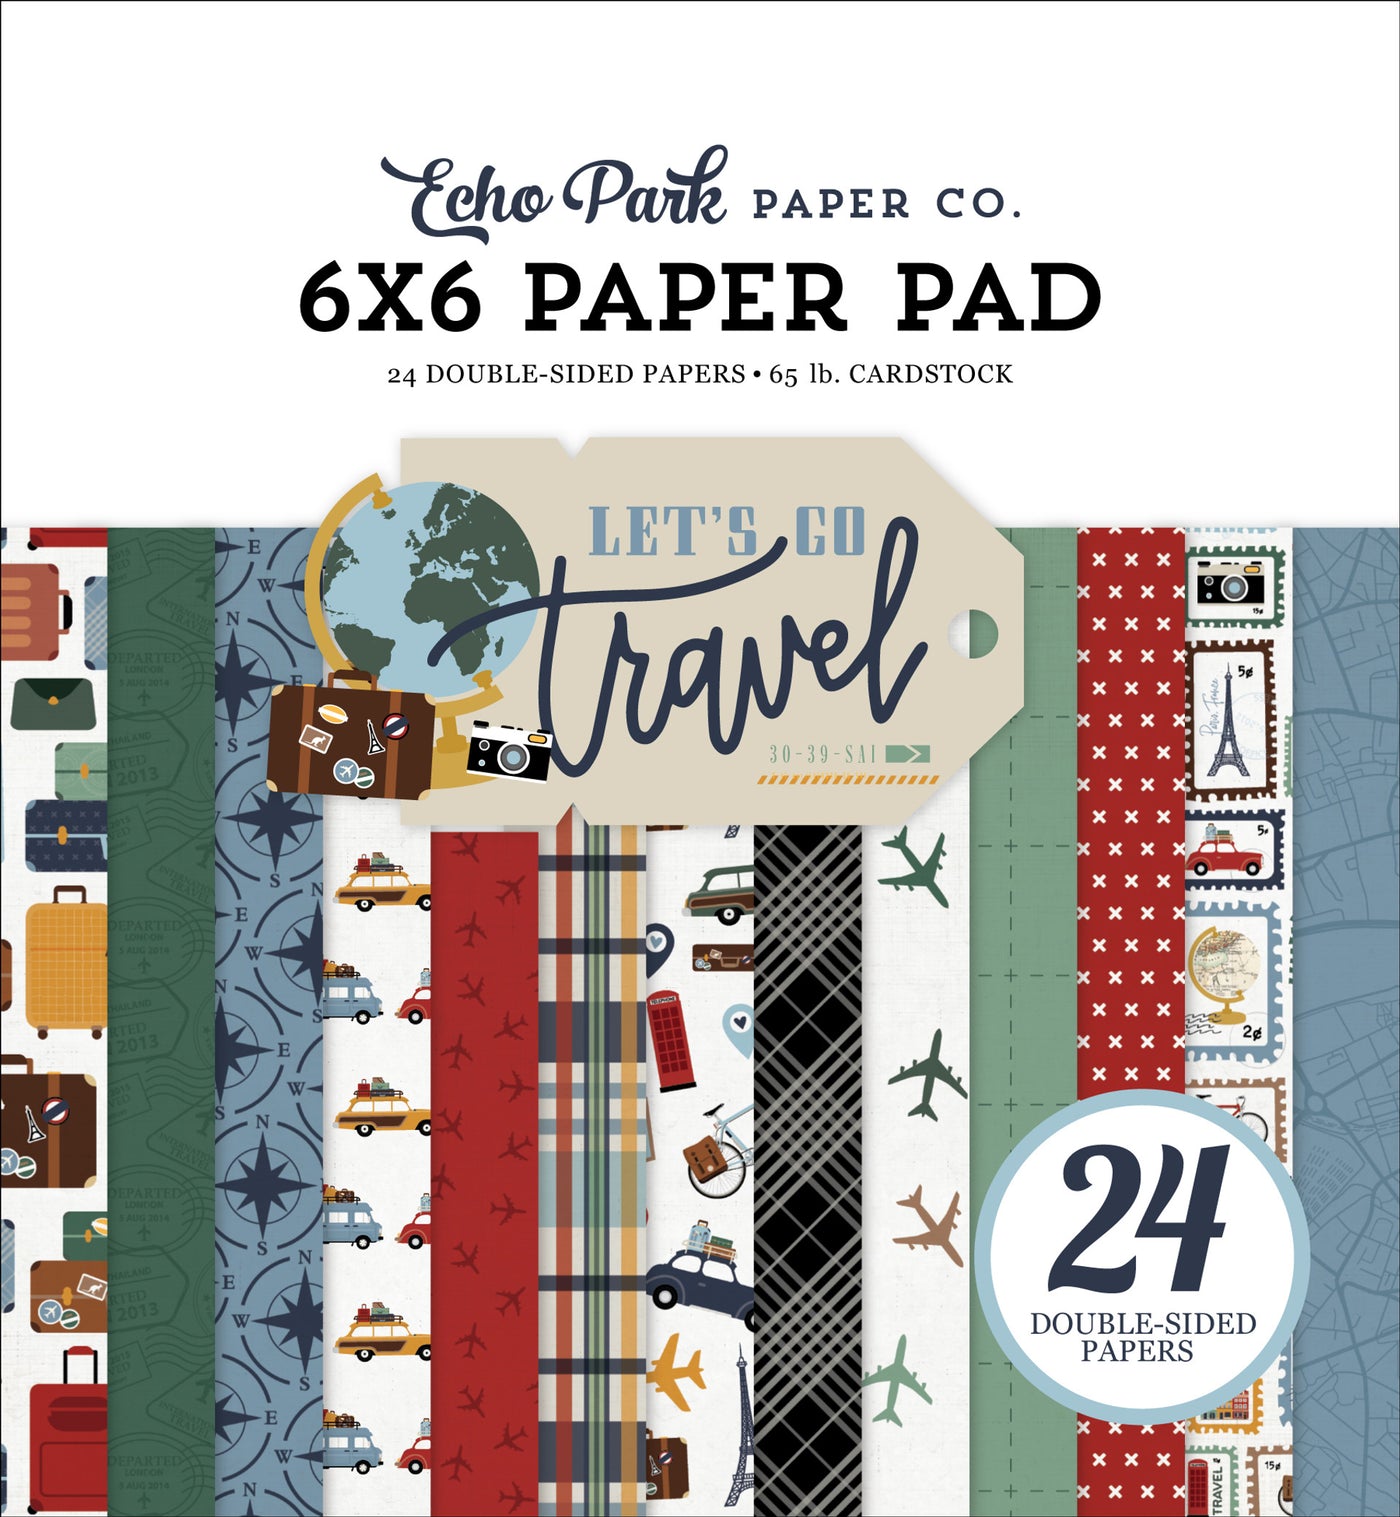 The LET'S GO TRAVEL 6x6 Paper Pad by Echo Park is a delightful collection for every avid traveler and scrapbooking enthusiast. This pad features a carefully curated selection of 6x6 inch patterned papers, designed to capture the spirit of adventure and wanderlust.